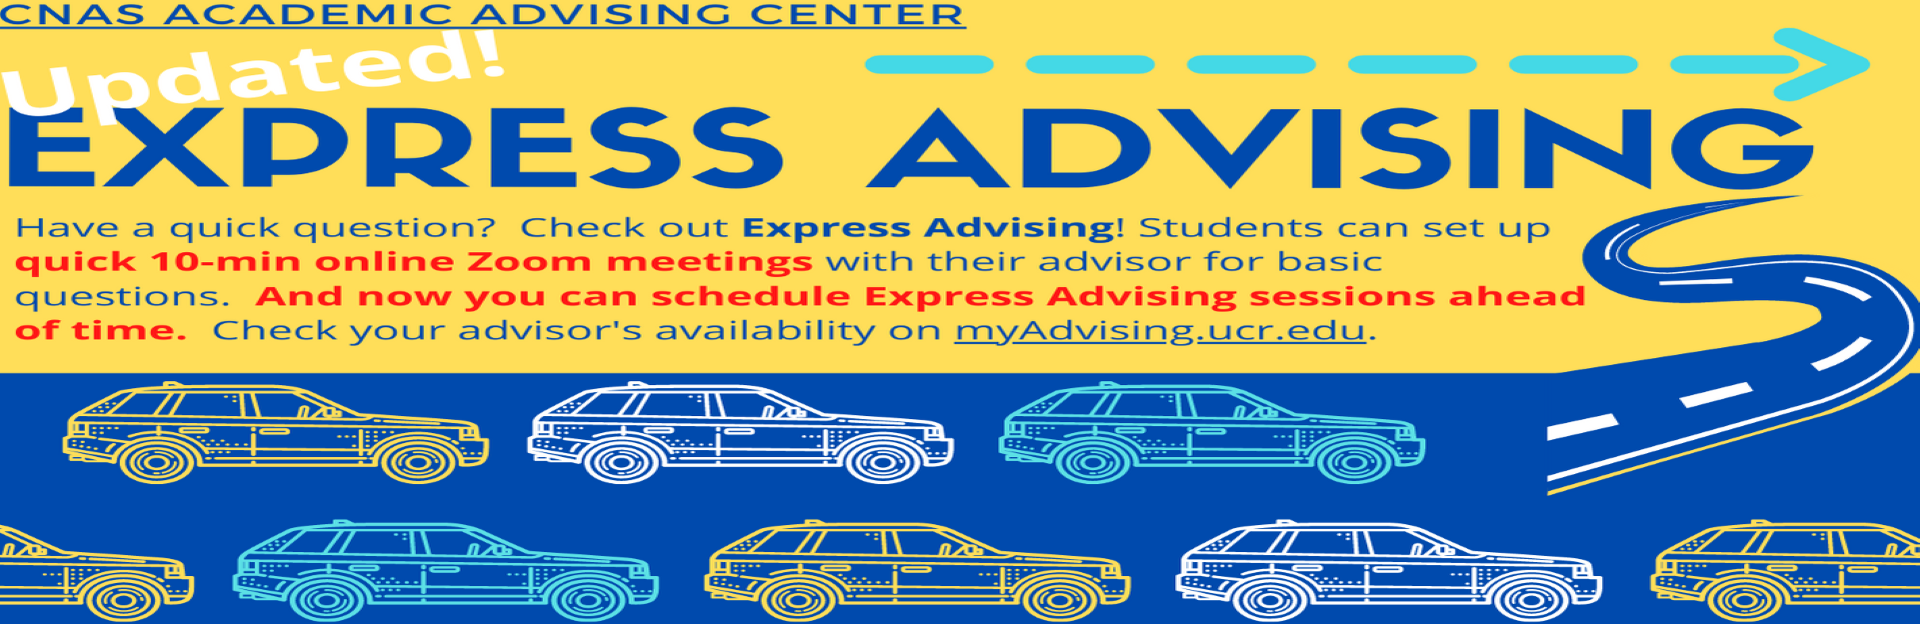 Updated CNAS Express Advising Banner Image 